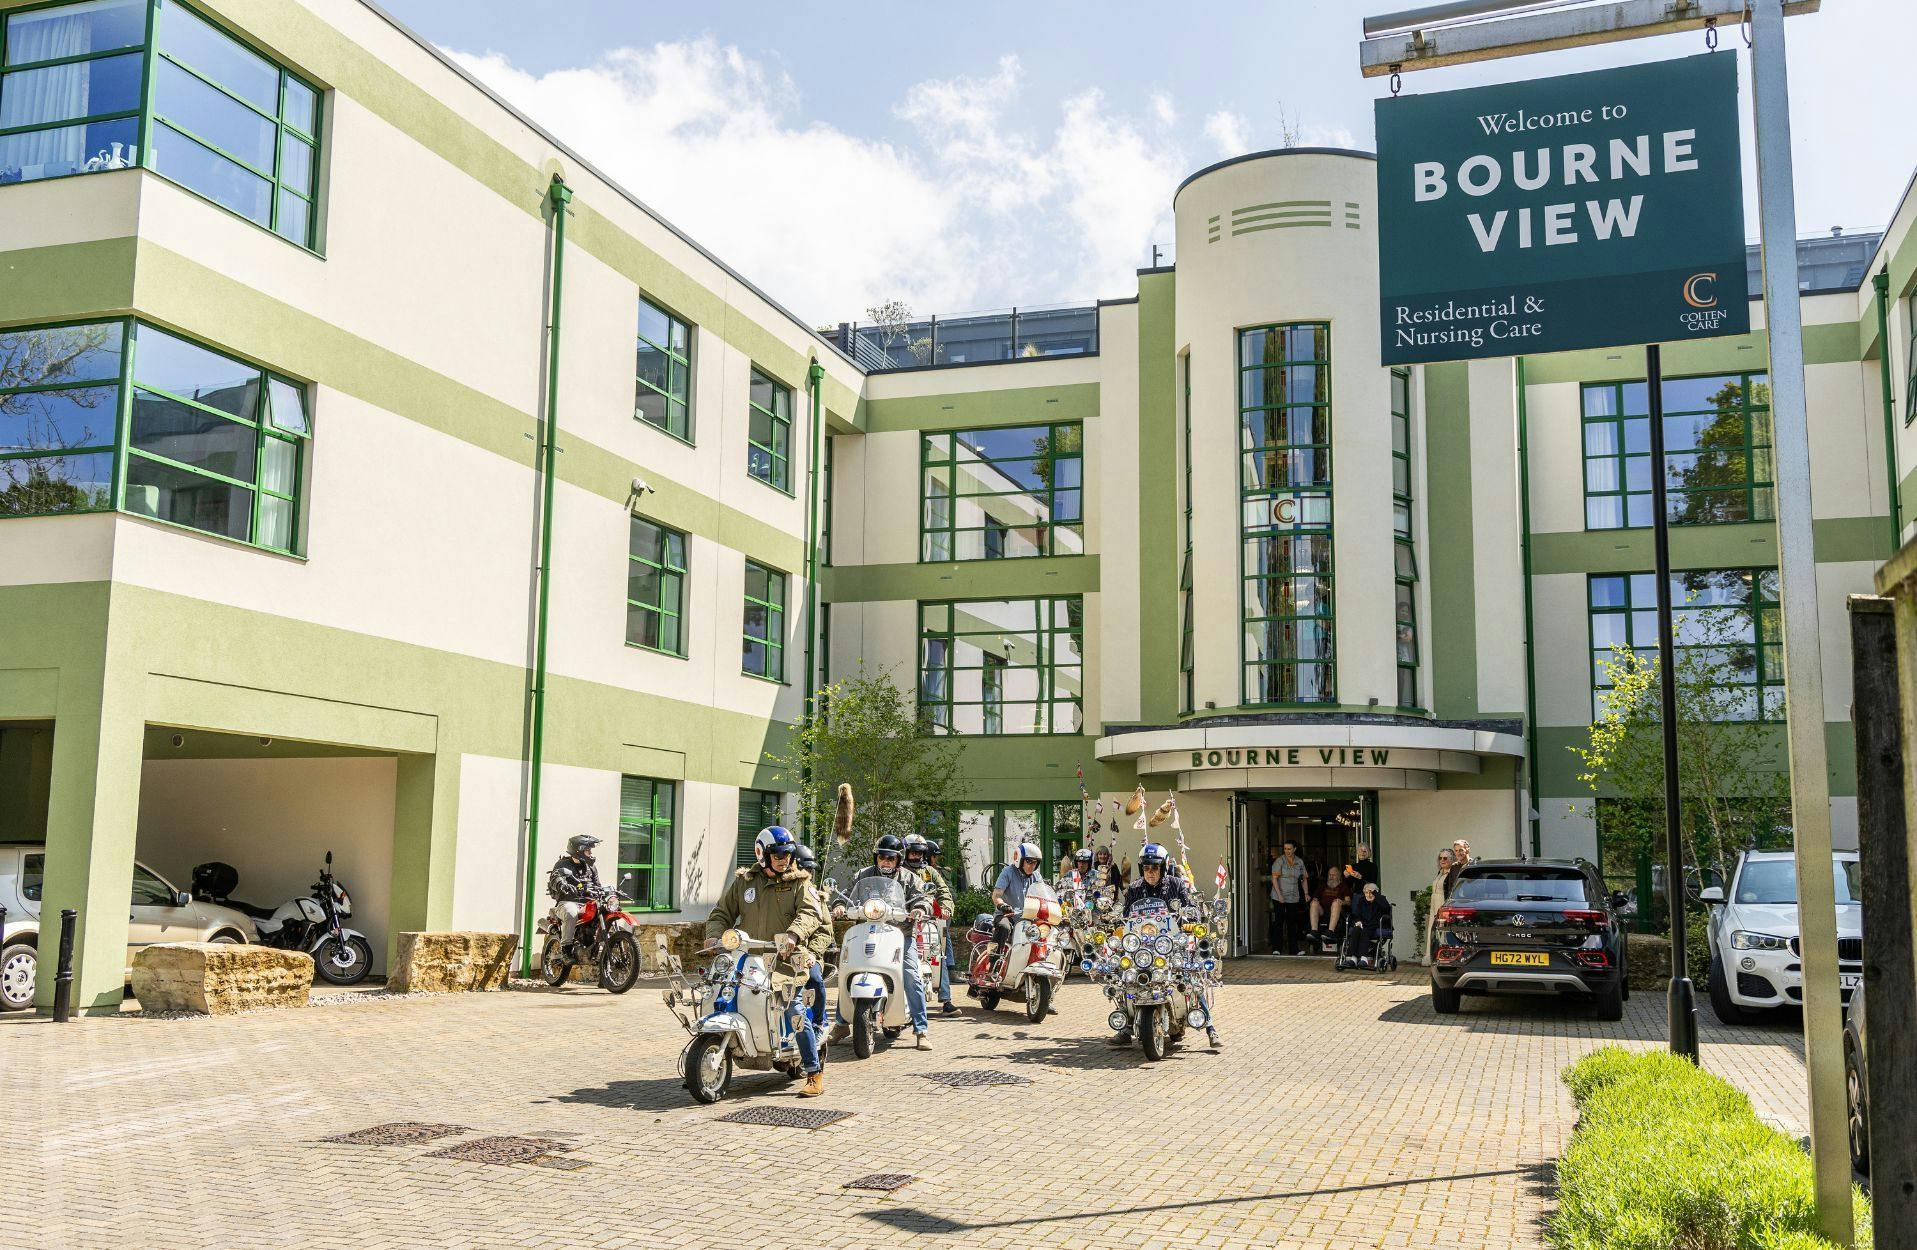 Bourne View Care Home in Bournemouth